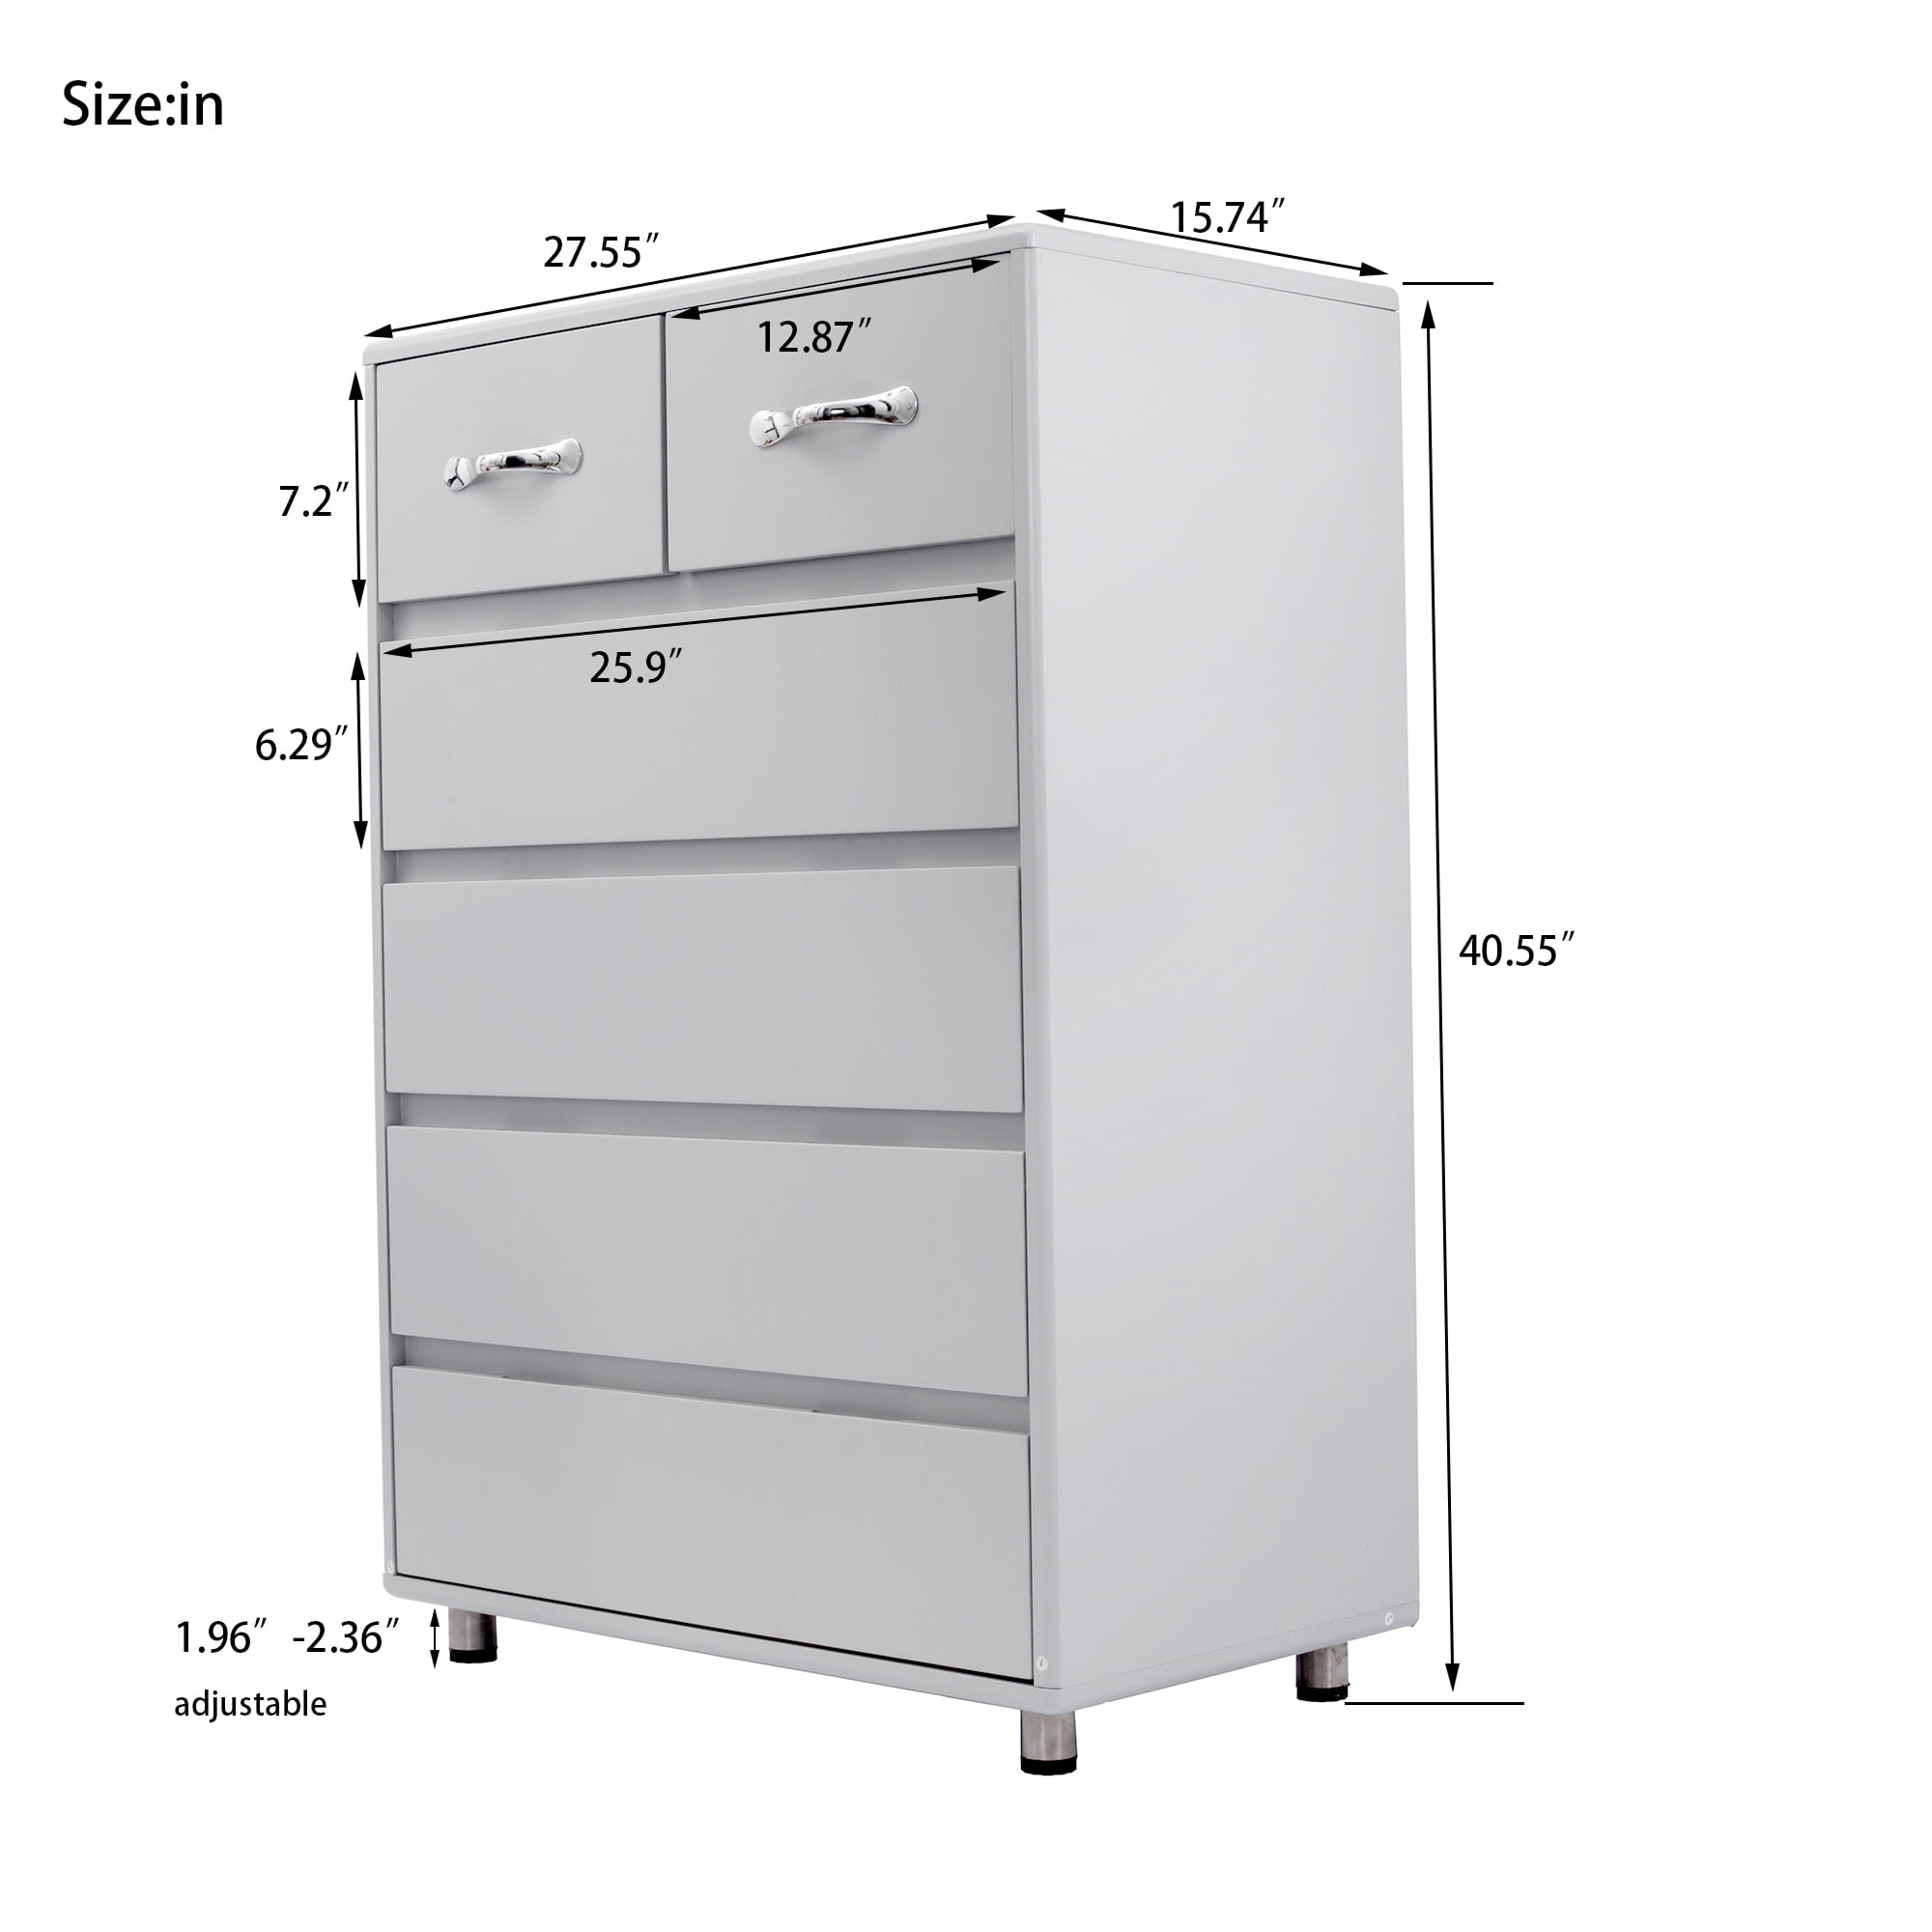 Tall Dressers For Bedroom 6 Drawer Dresser In Home Heavy Duty Mdf Chest Of Drawers Side Table Bedroom Furniture Vertical Storage Cabinet For Closet Entryway Hallway Nursery Office Gray Q14247 Walmart Com